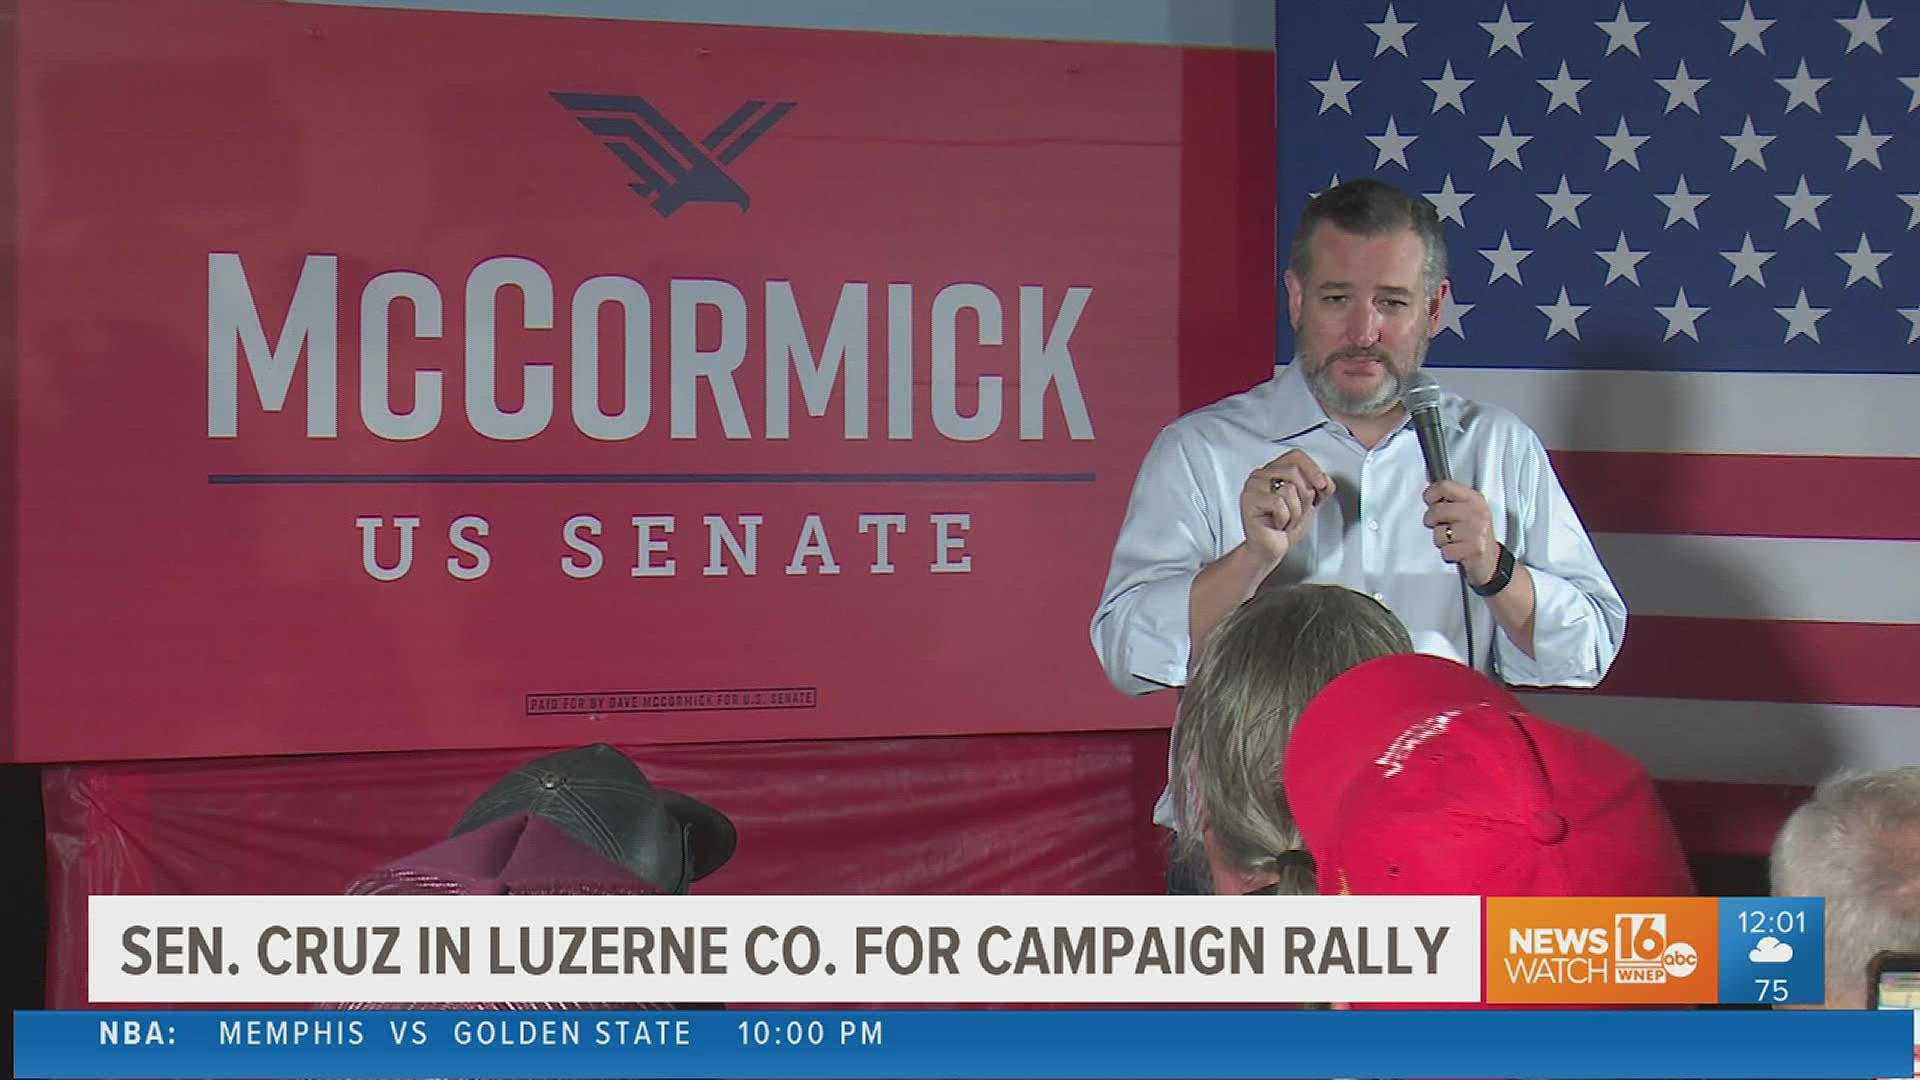 Senator Ted Cruz is campaigning across the state with Senate candidate Dave McCormick.